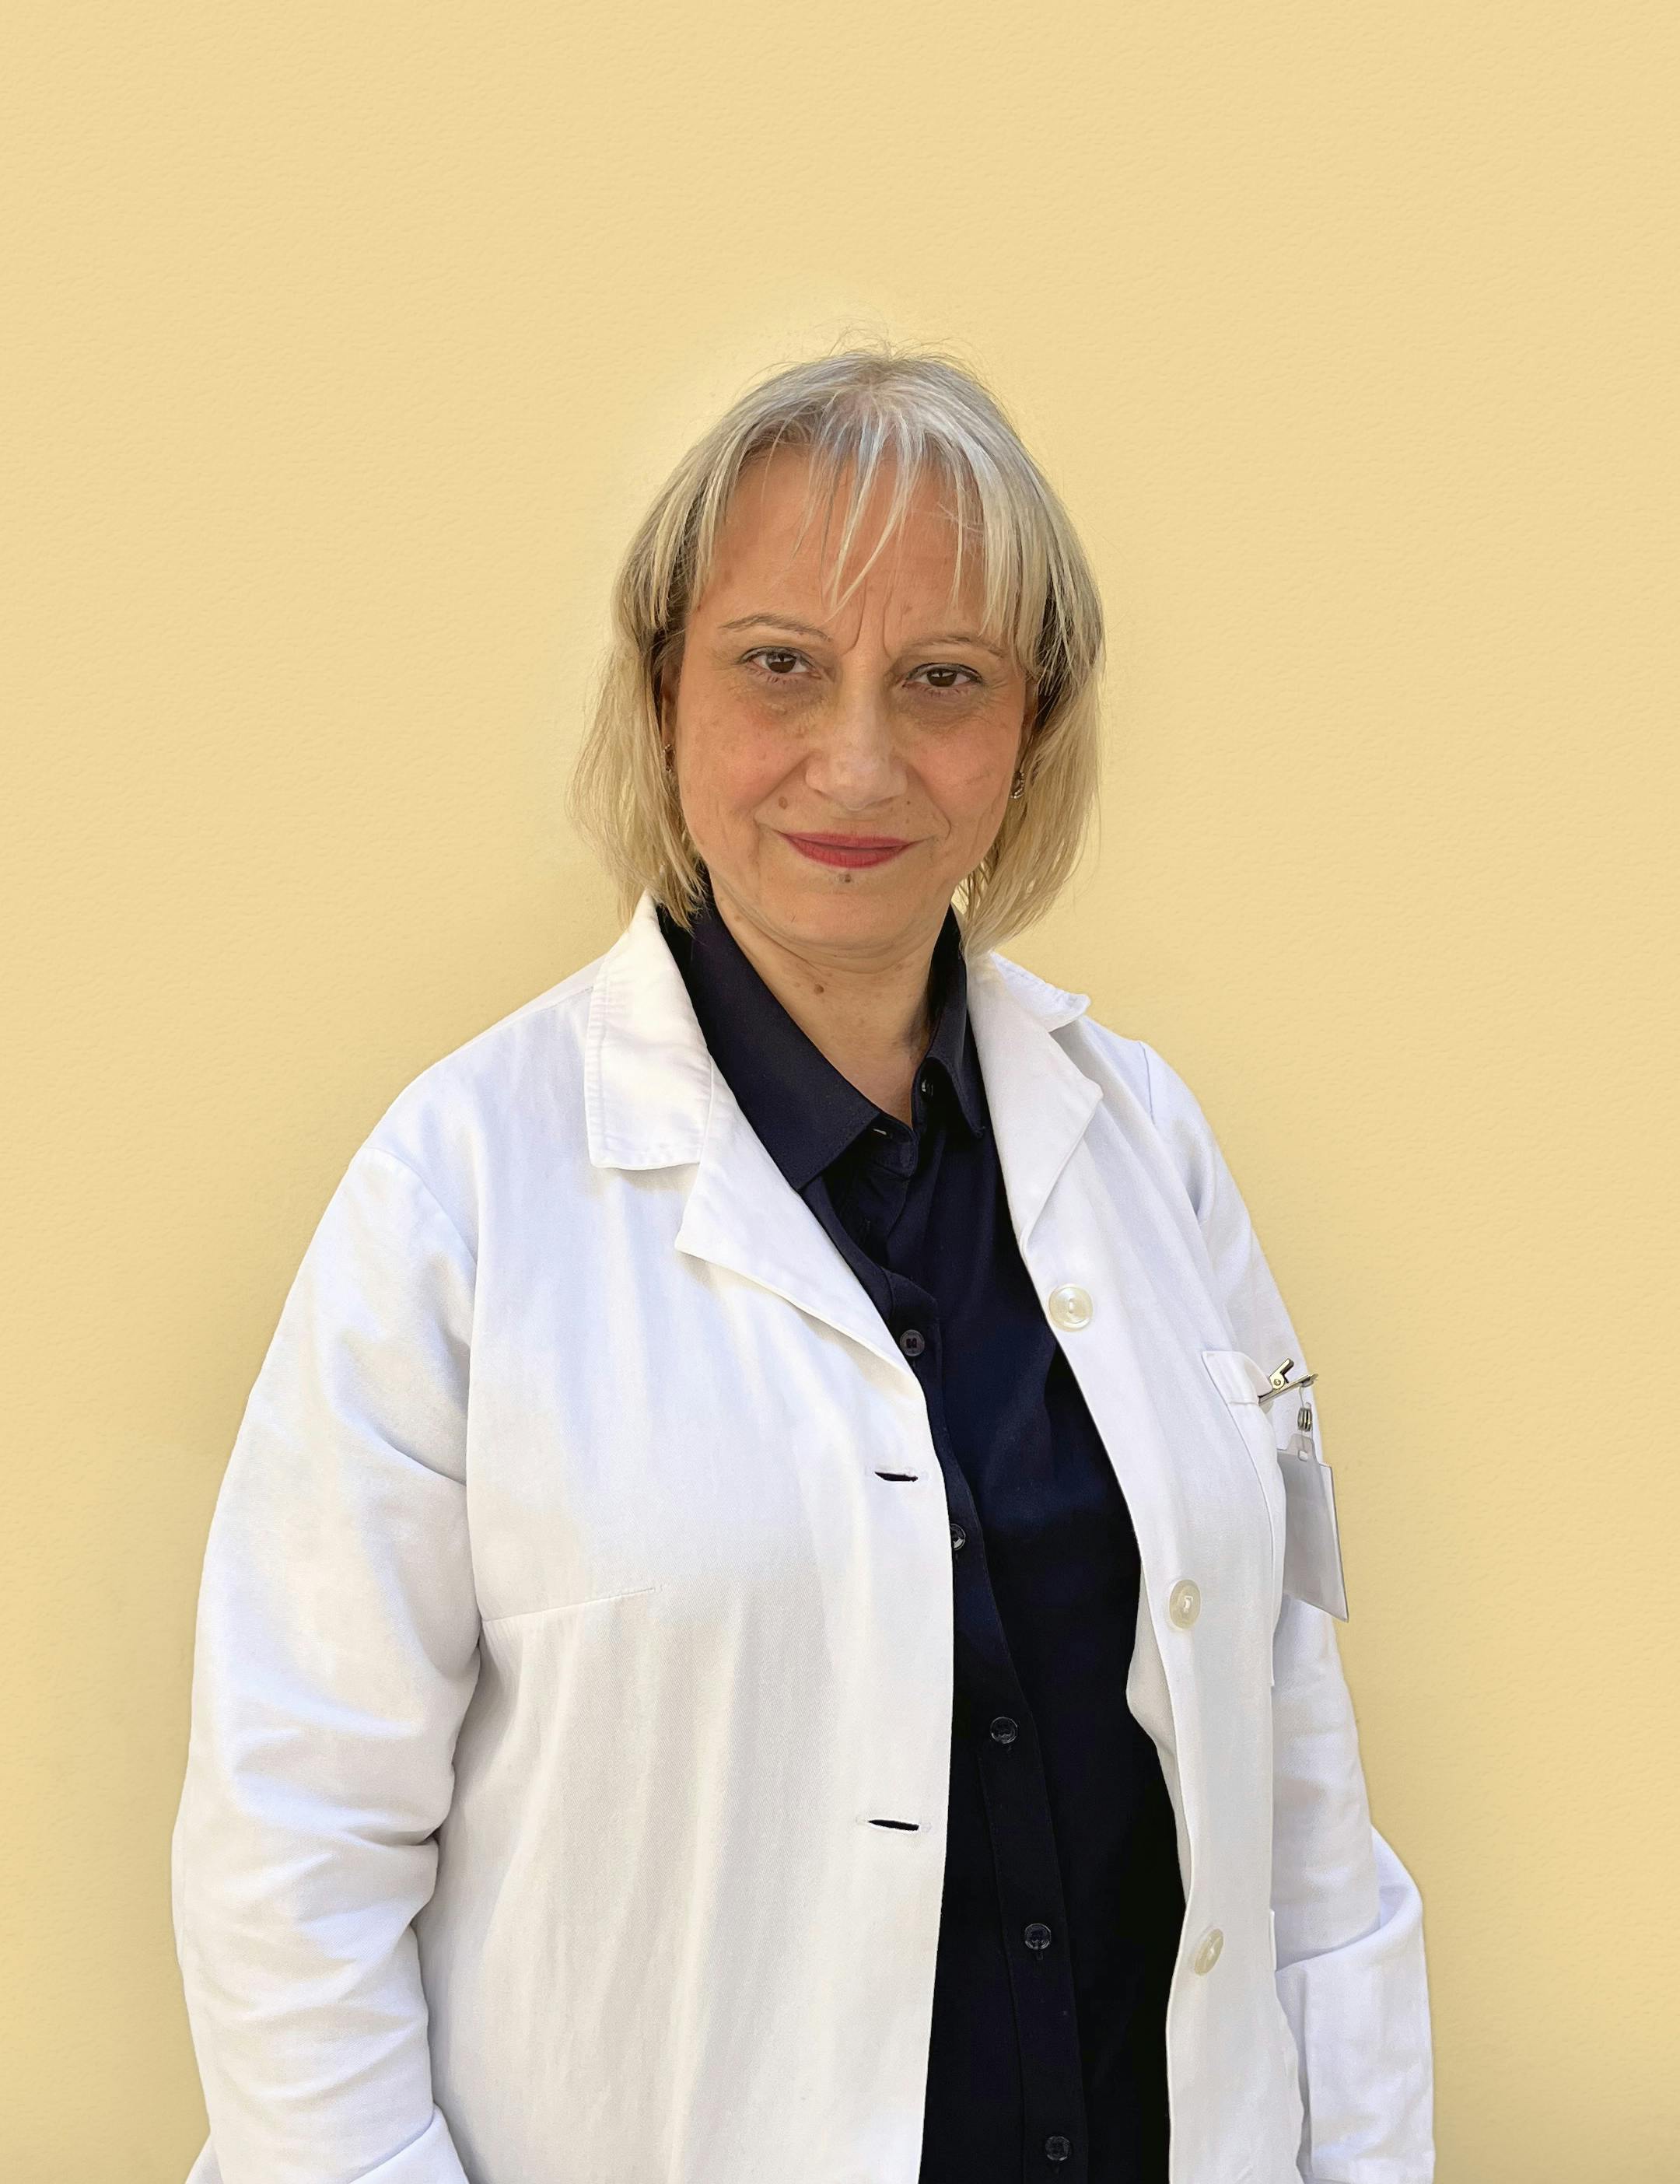 Middle-aged woman with bob blond hair, white doctor's coat and dark blue shirt slightly smiling looking directly at the camera.